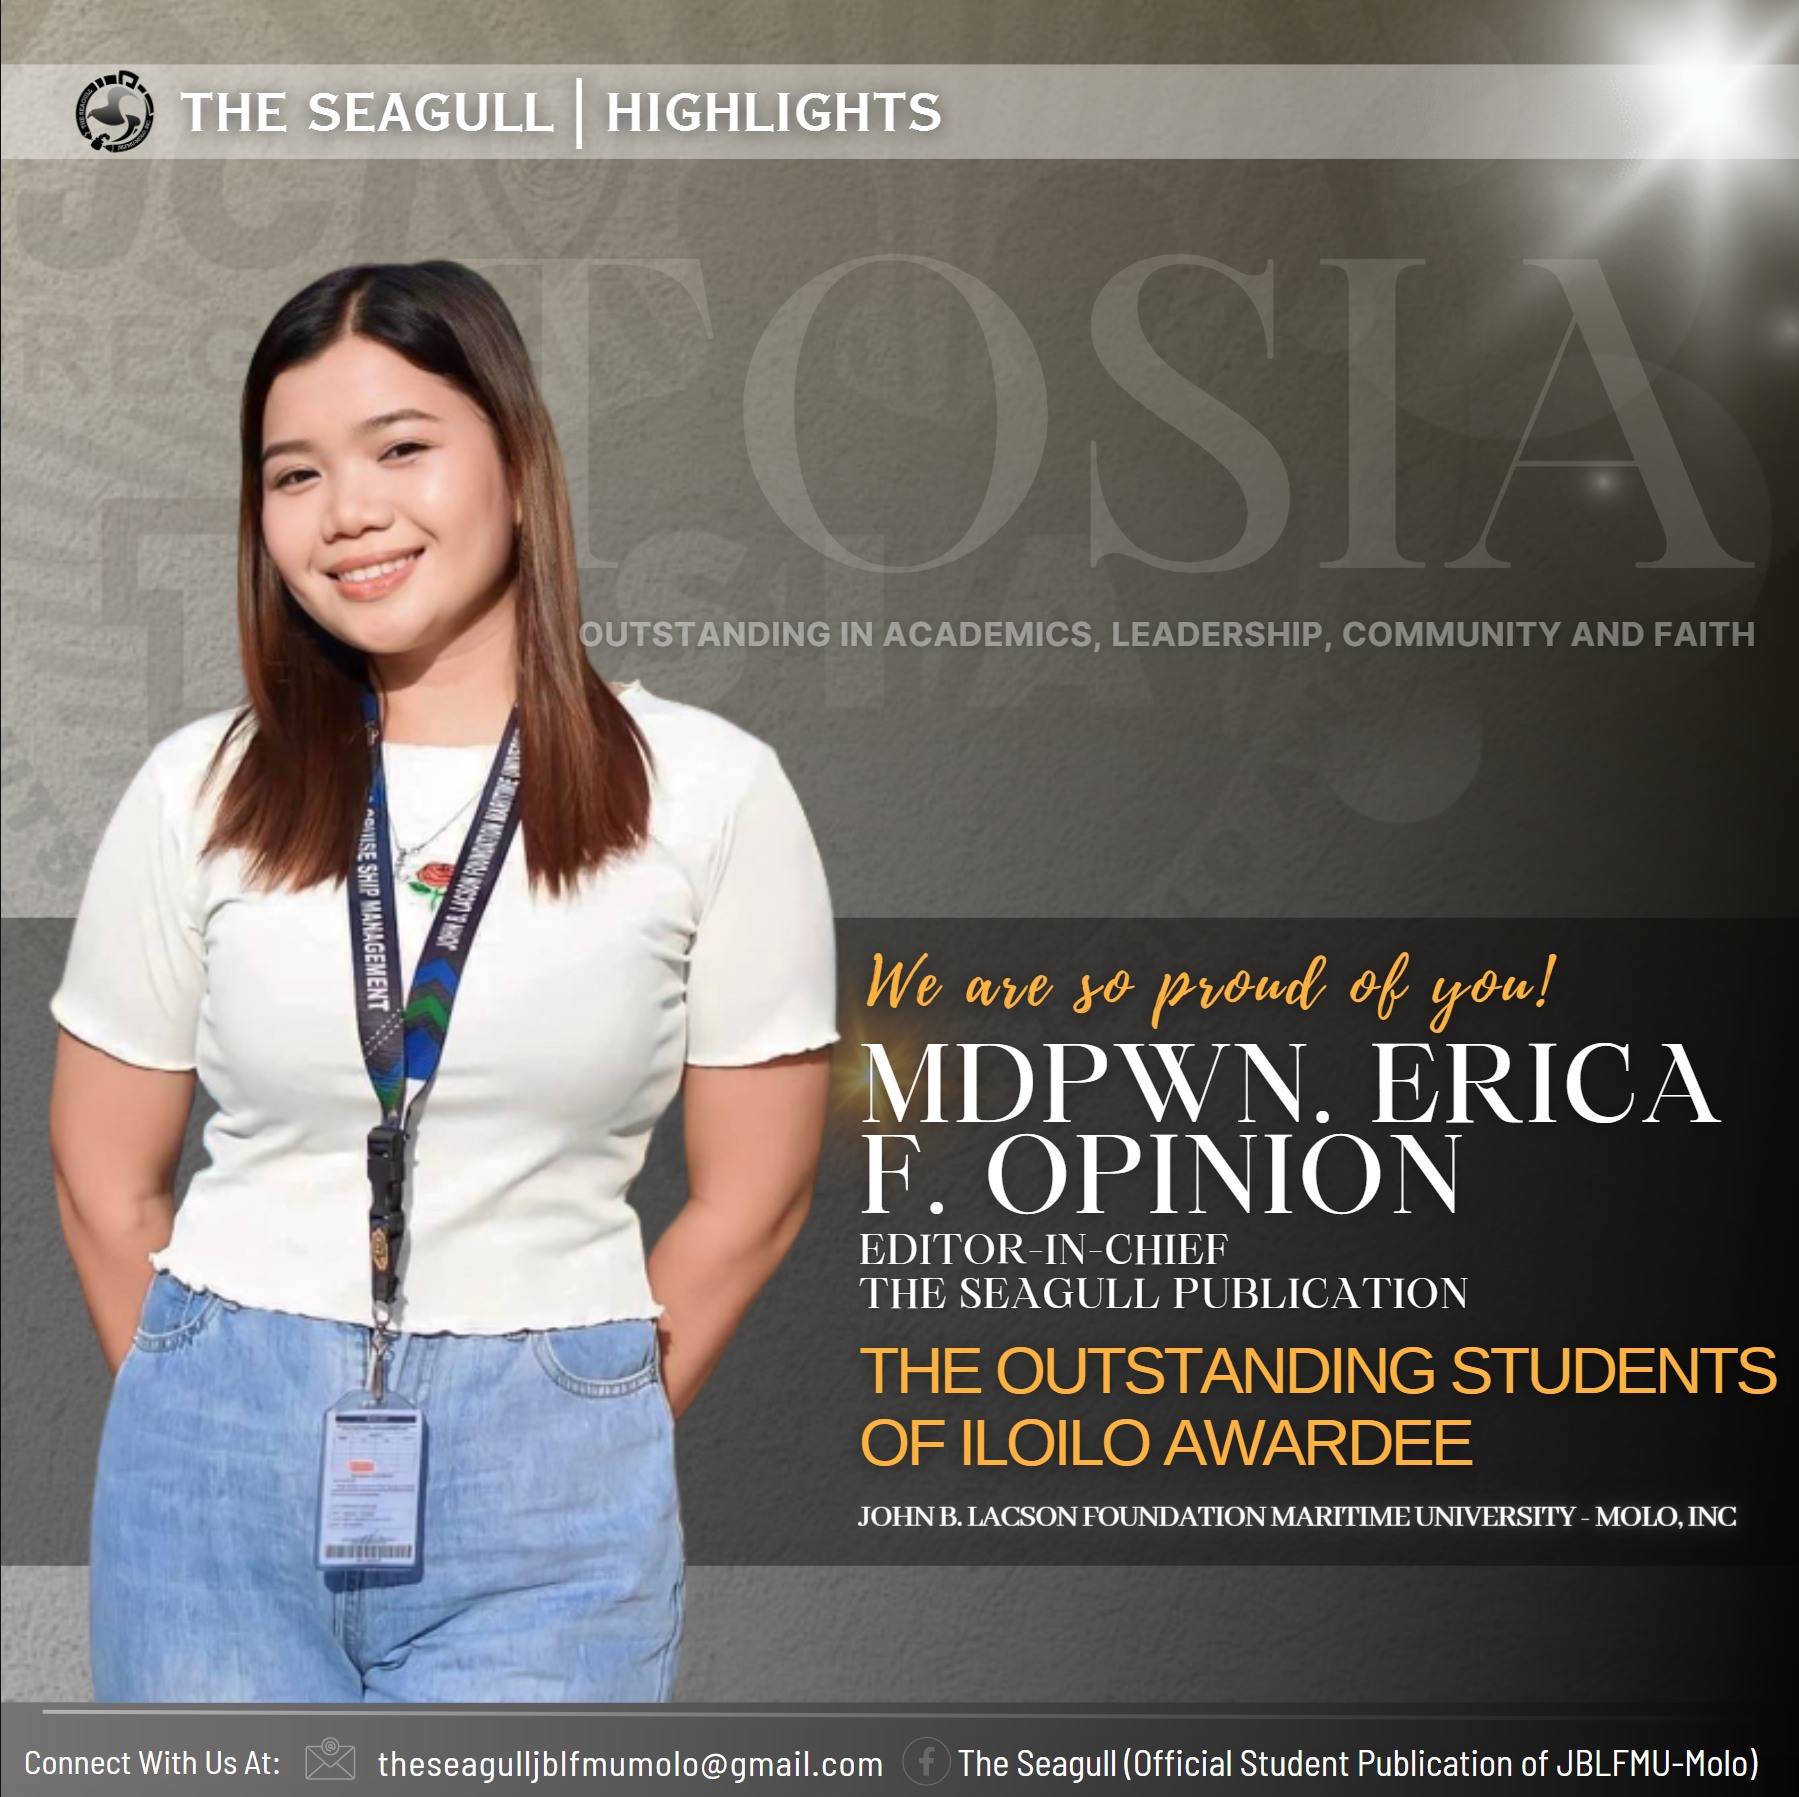 Opinion emerge to the roster of top 10 TOSIA Finalist college awardees